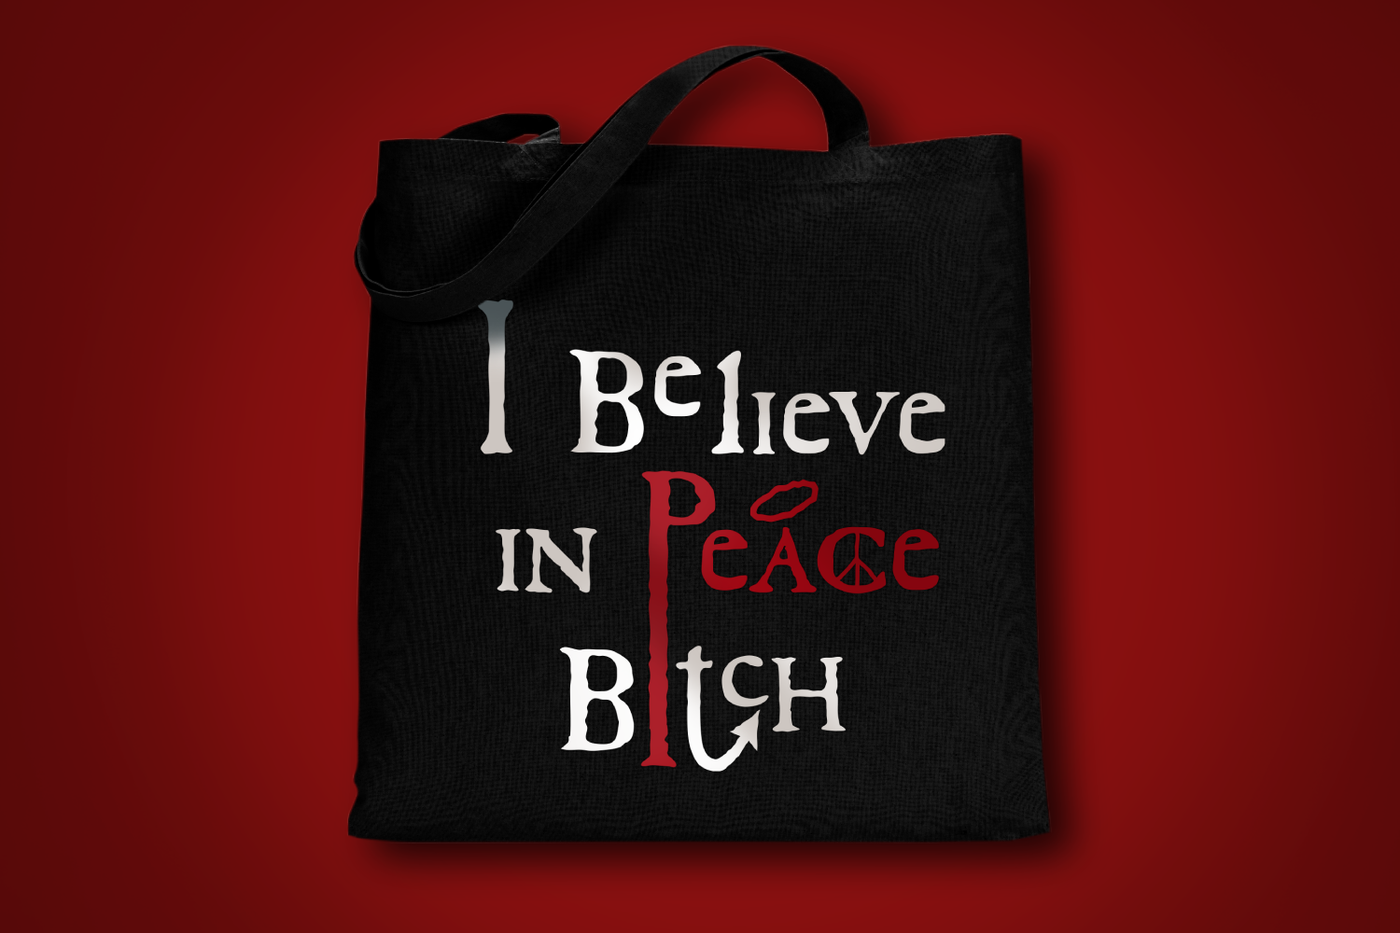 A tote bag that says "I believe in Peace Bitch."